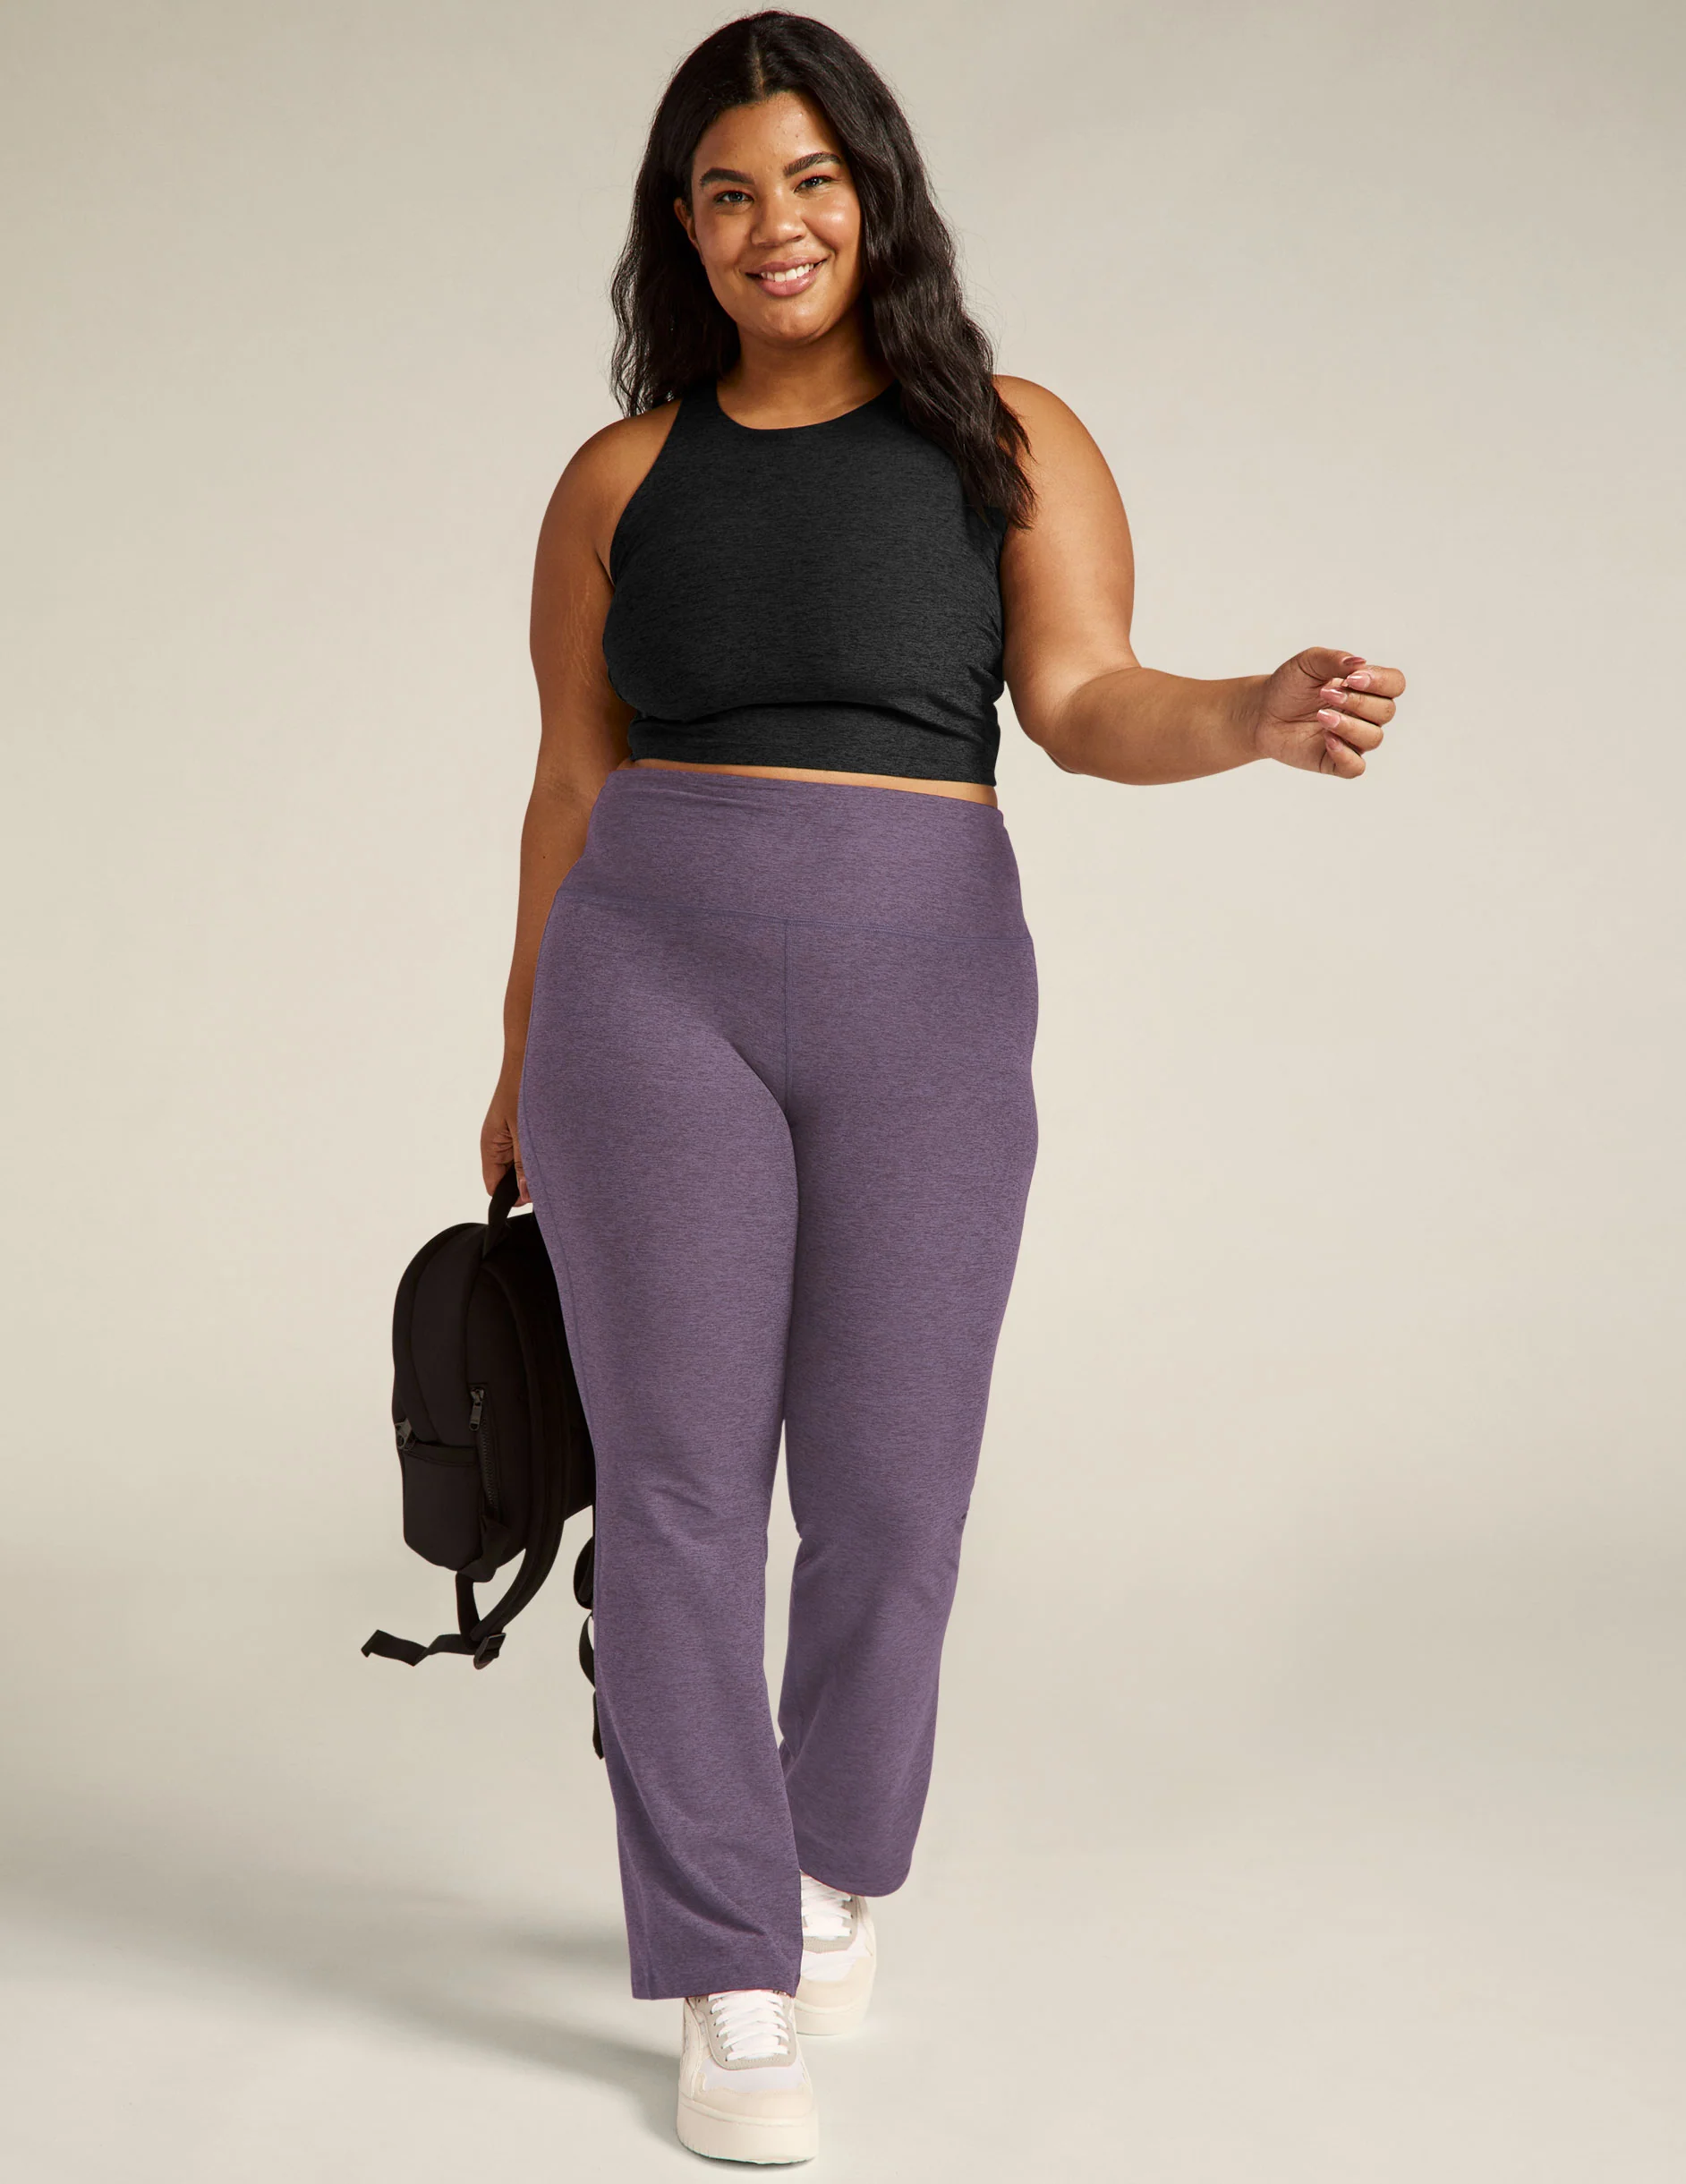 Top Selling Seamless Gym Clothing Plus Size 2XL to 4XL Ropa De